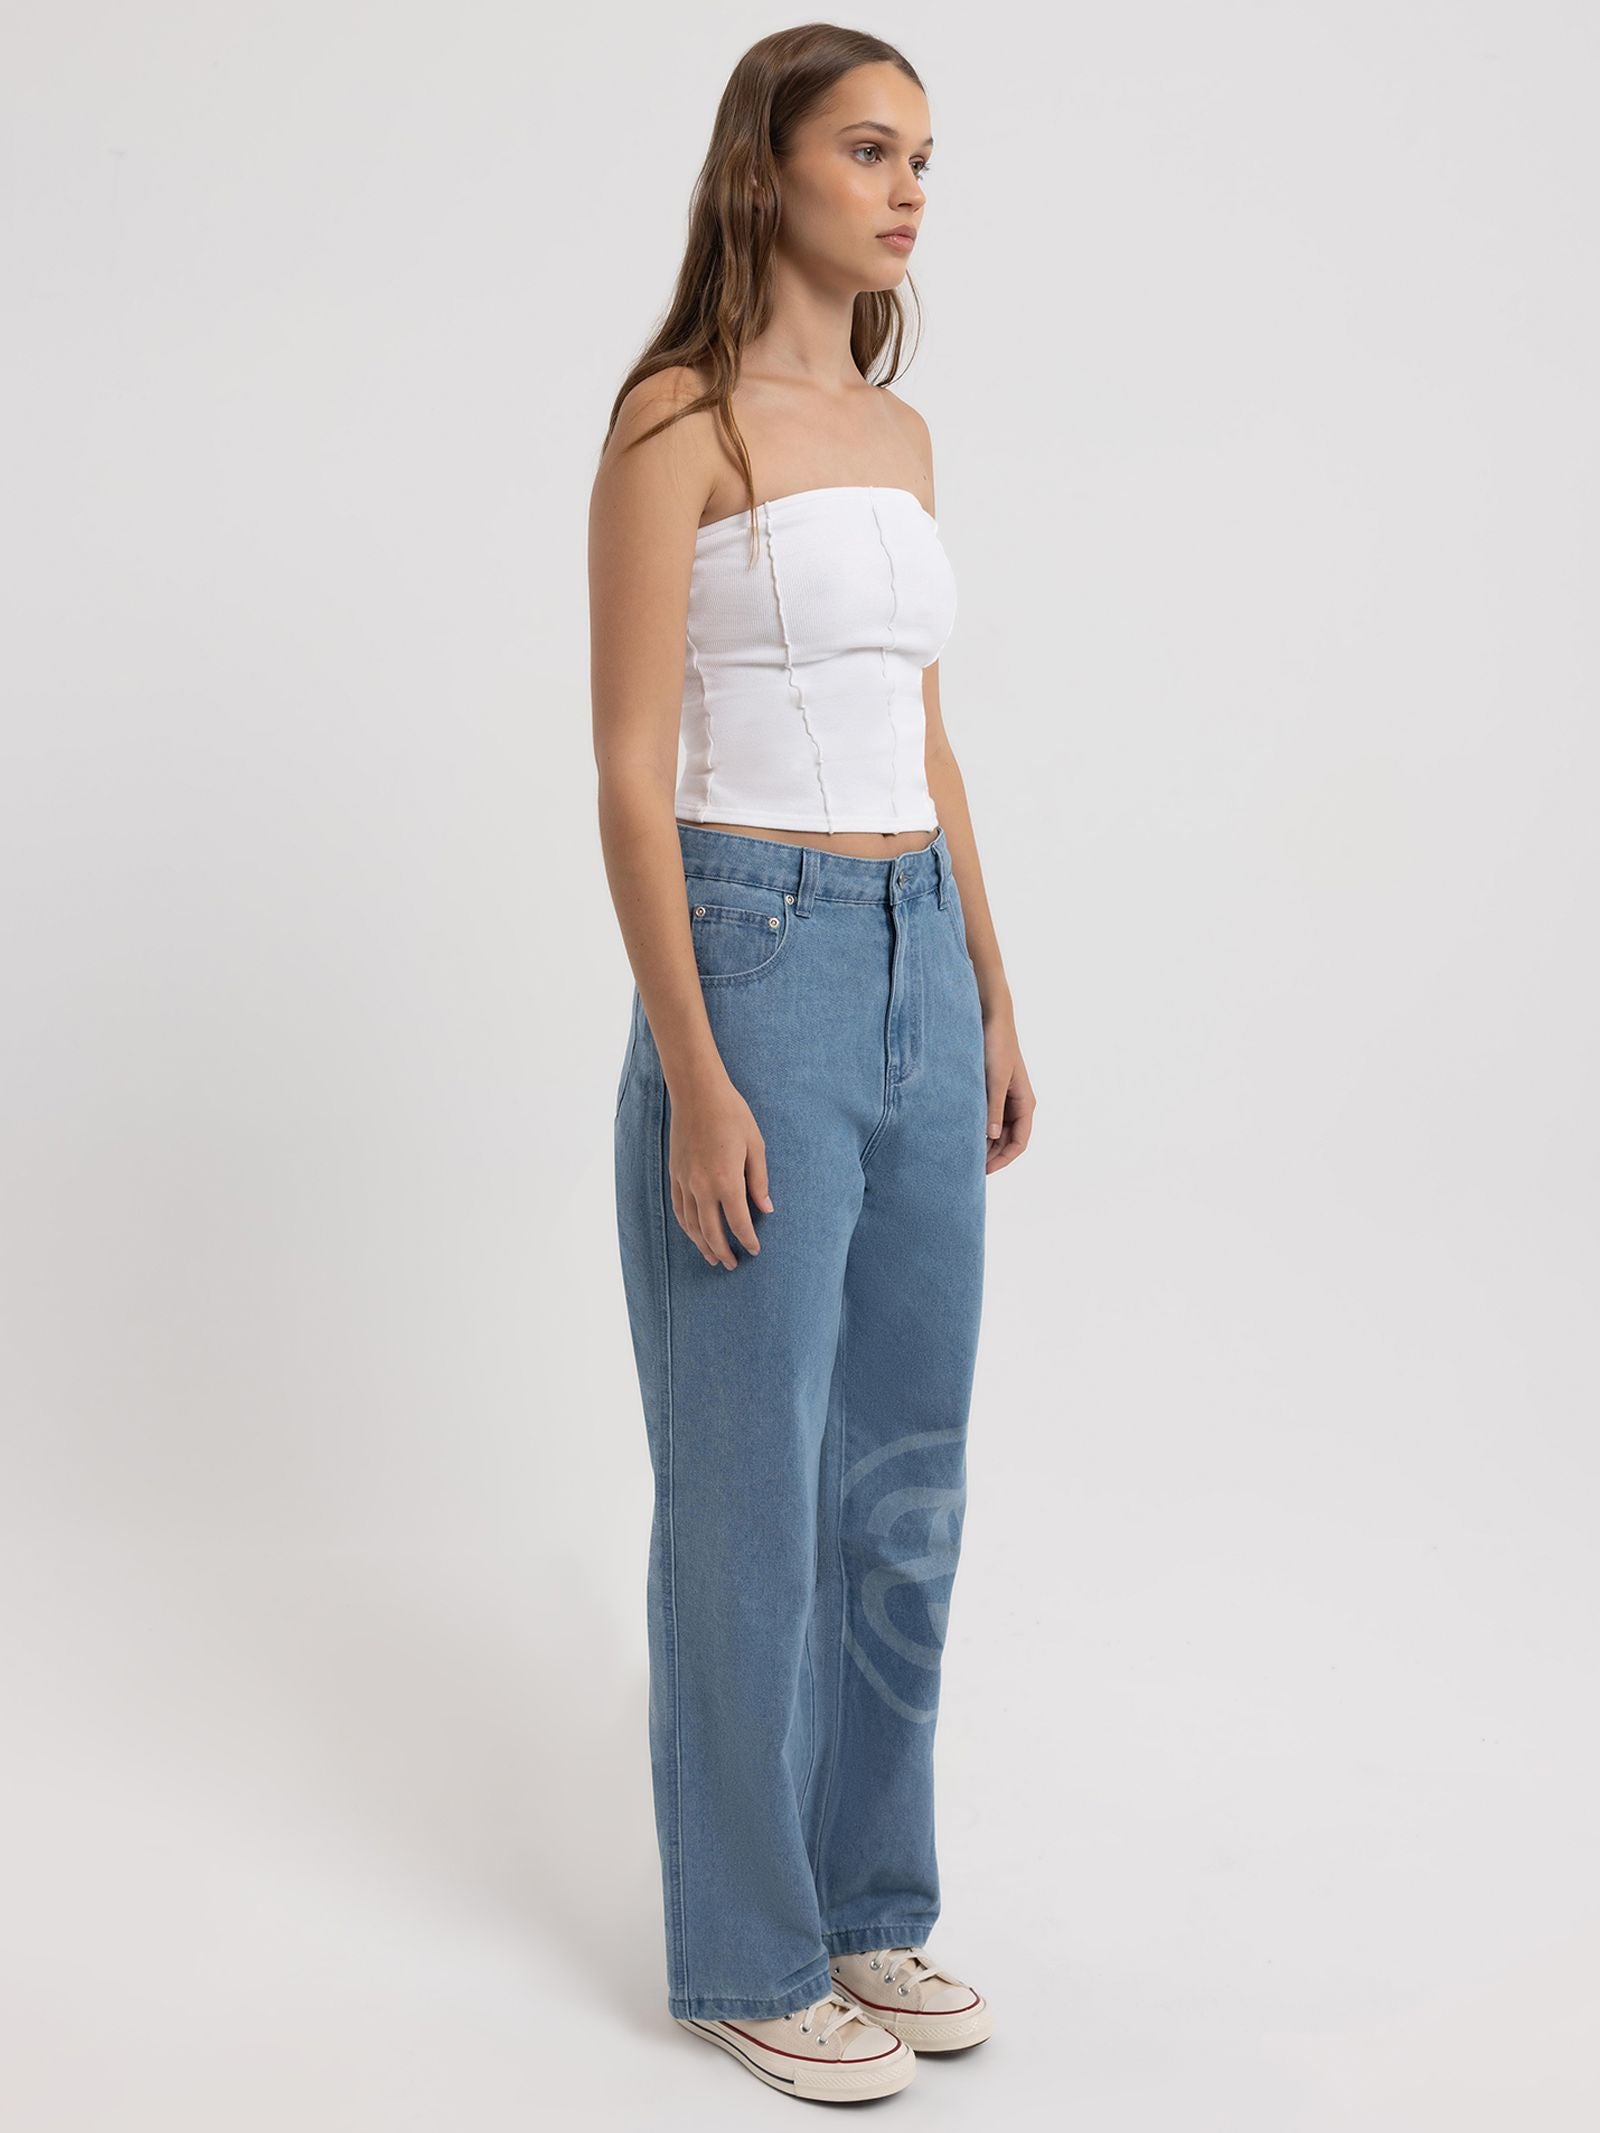 SS Link Pant